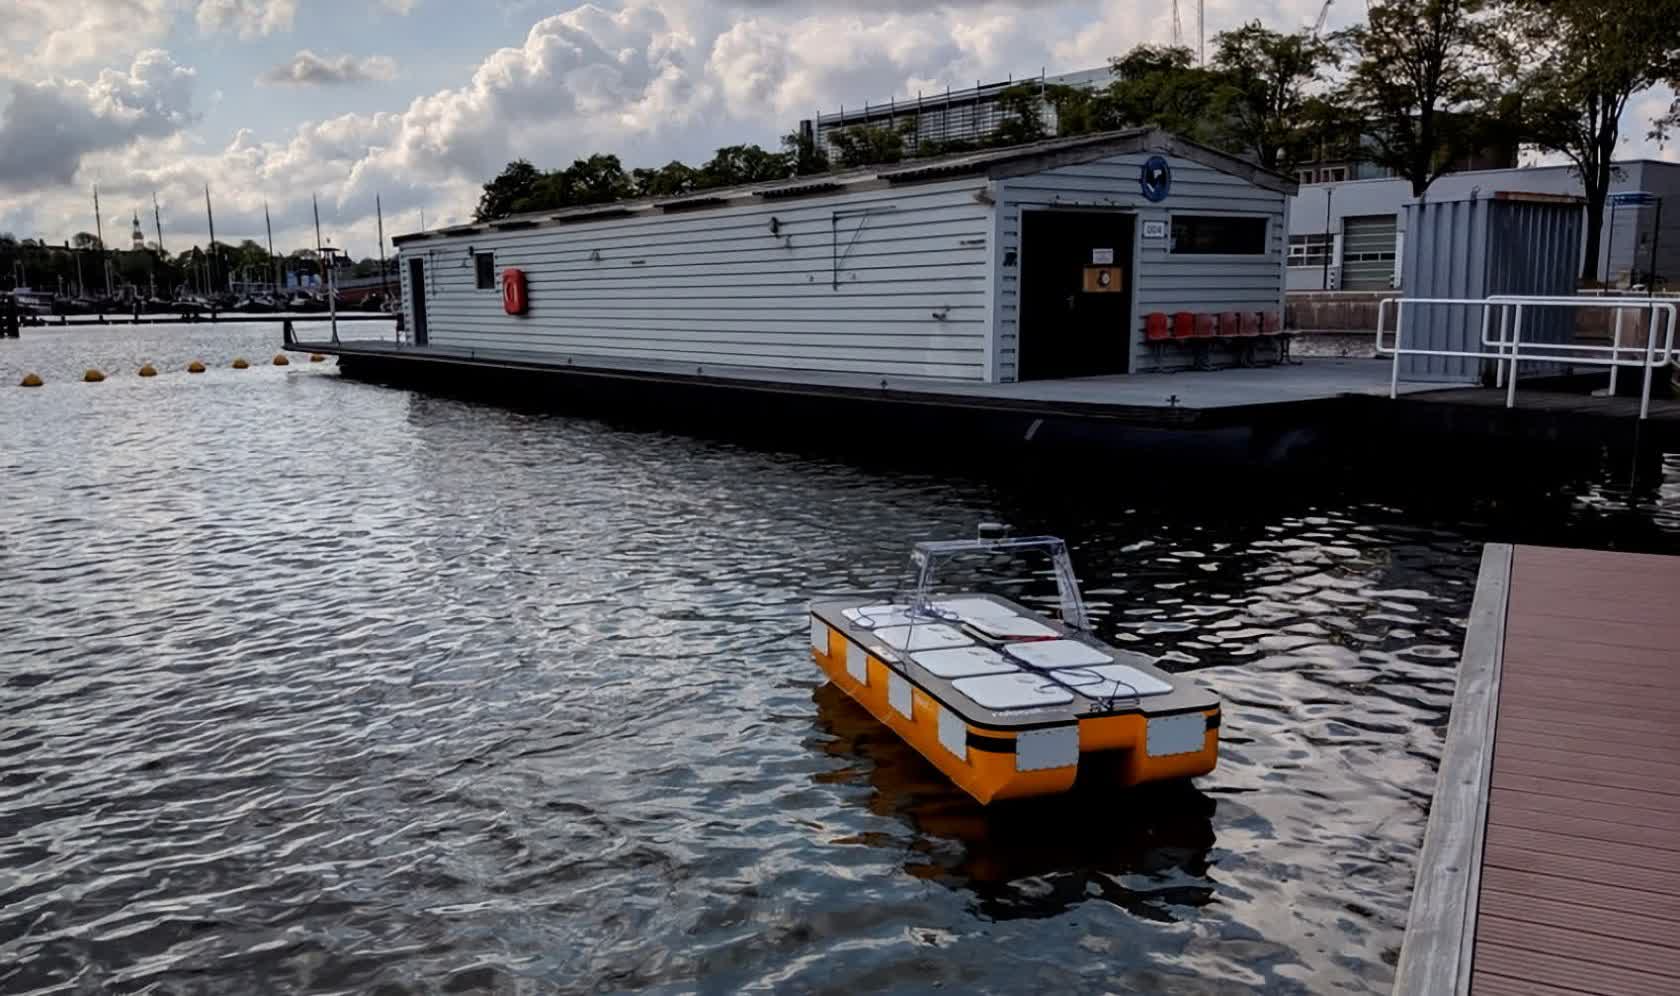 MIT researchers create a self-driving 'Roboat' that can carry two passengers